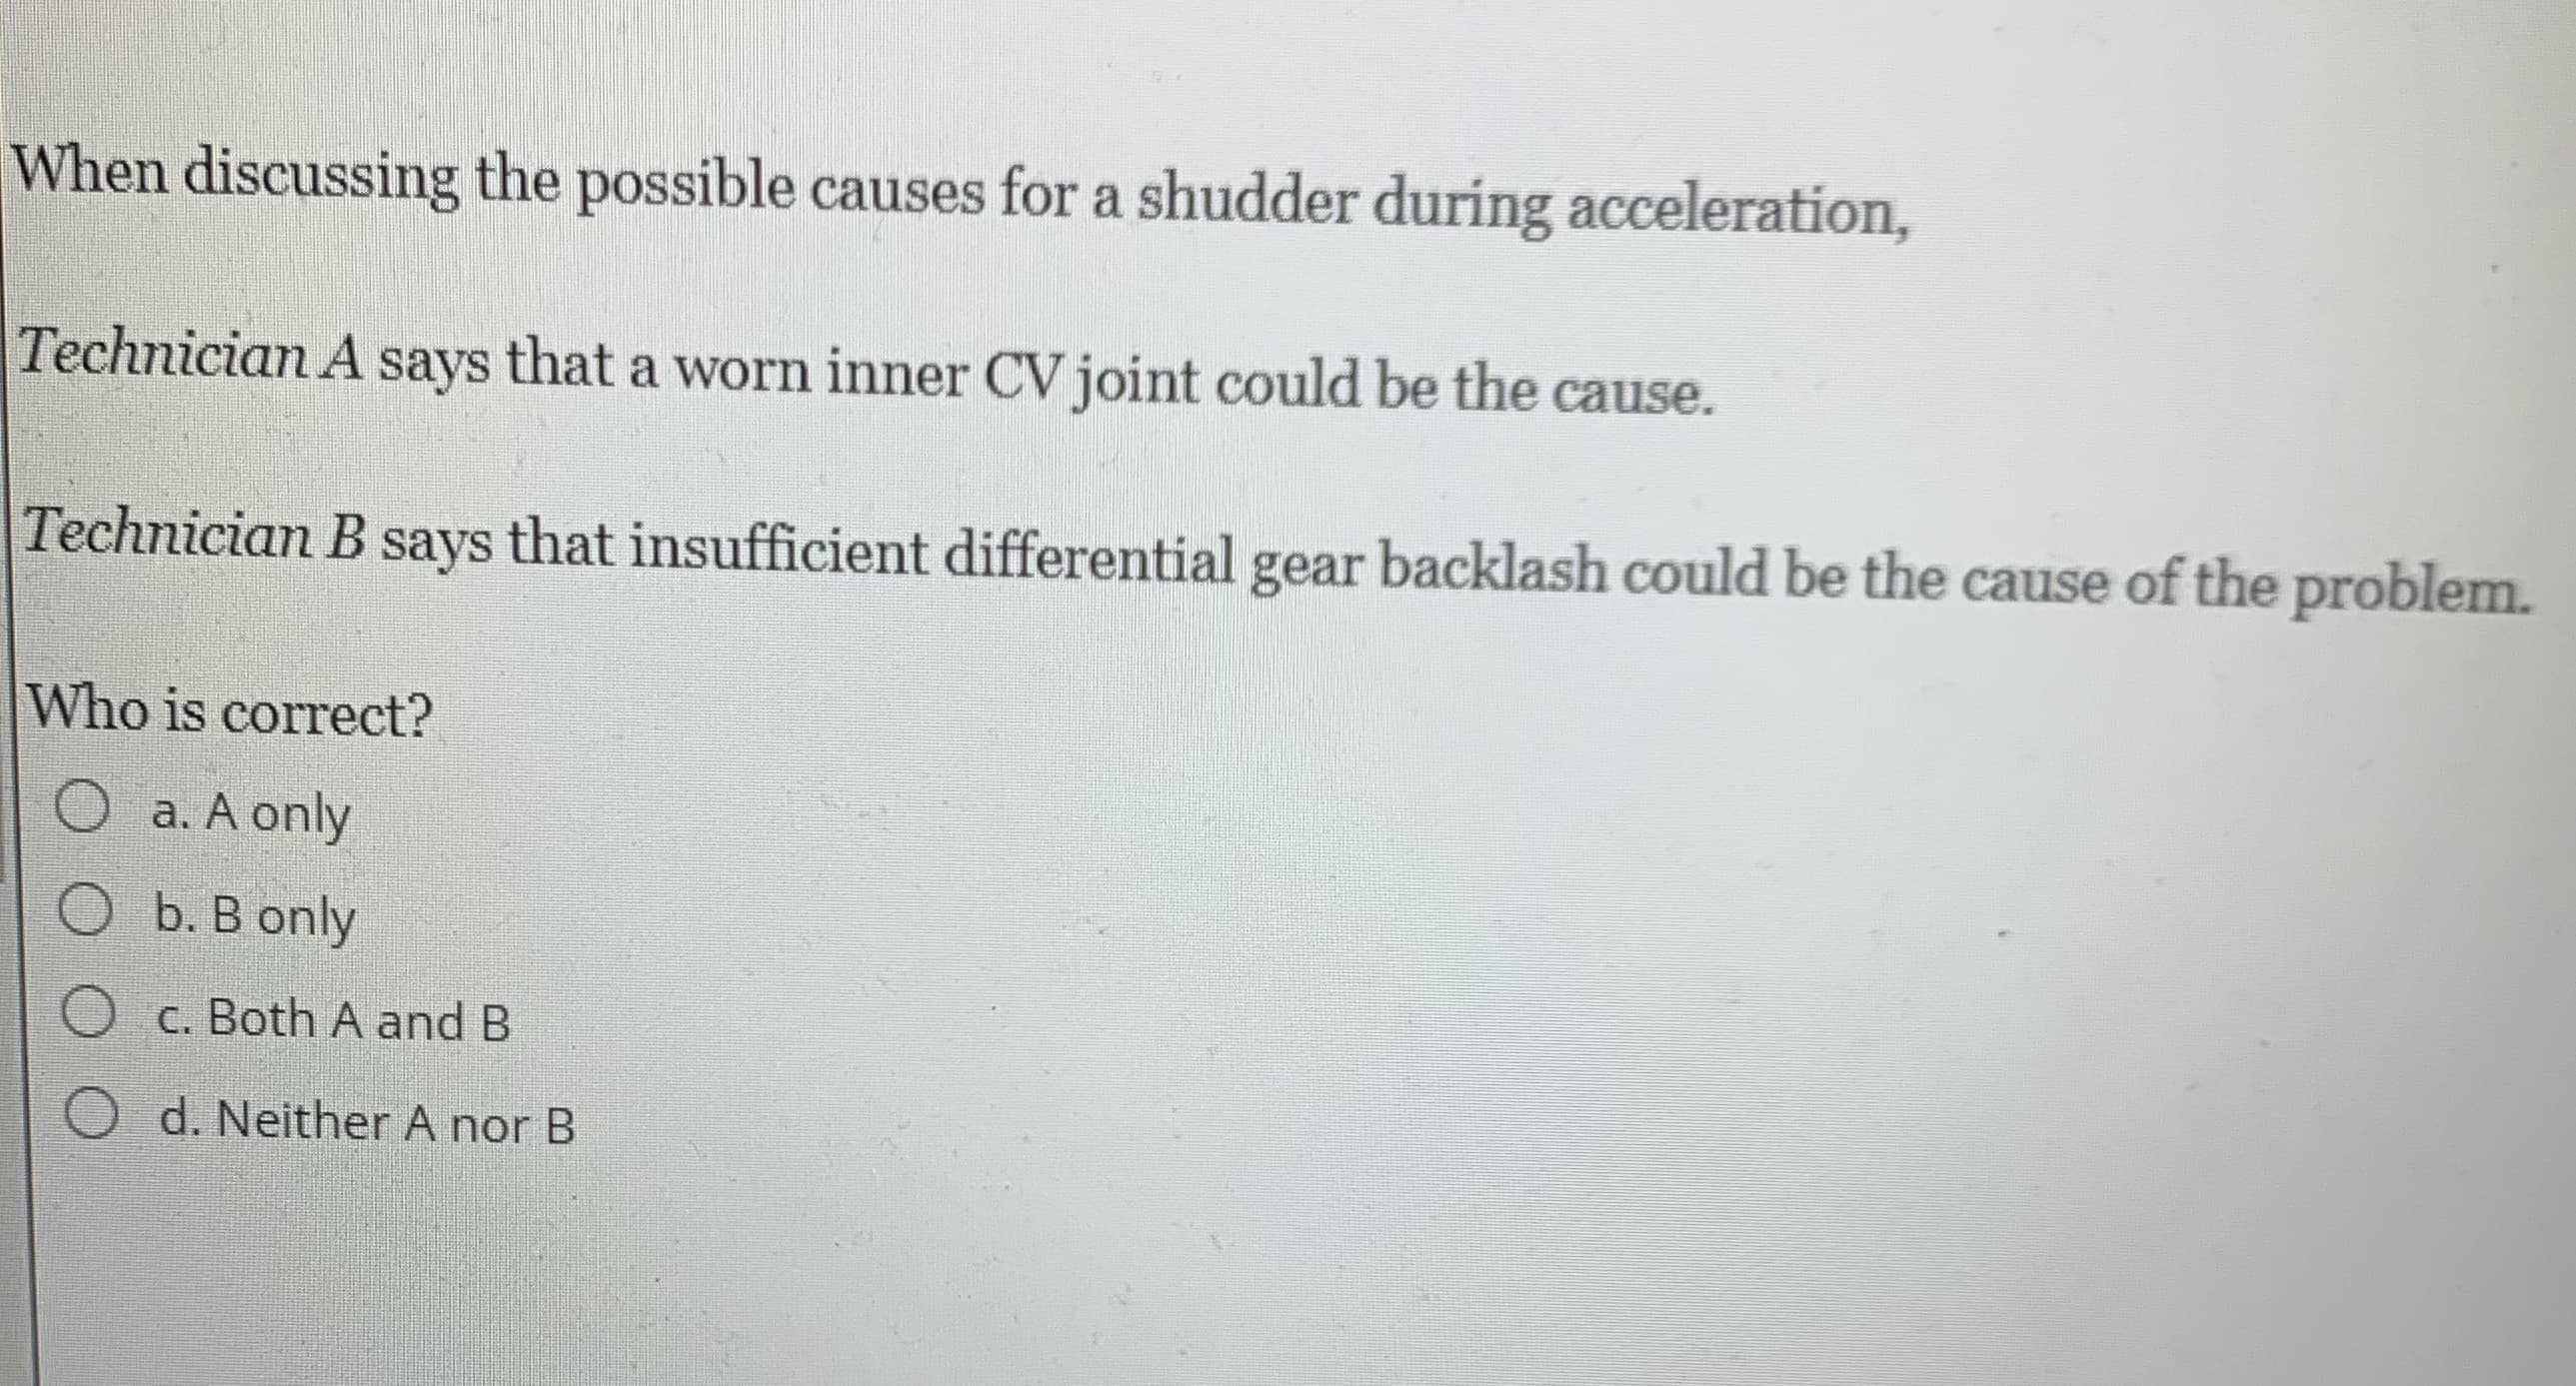 When discussing the possible causes for a shudder during acceleration,
Technician A says that a worn inner CV joint could be the cause.
Technician B says that insufficient differential gear backlash could be the cause of the problem.
Who is correct?
O a. A only
O b. B only
O c. Both A and B
O d. Neither A nor B
